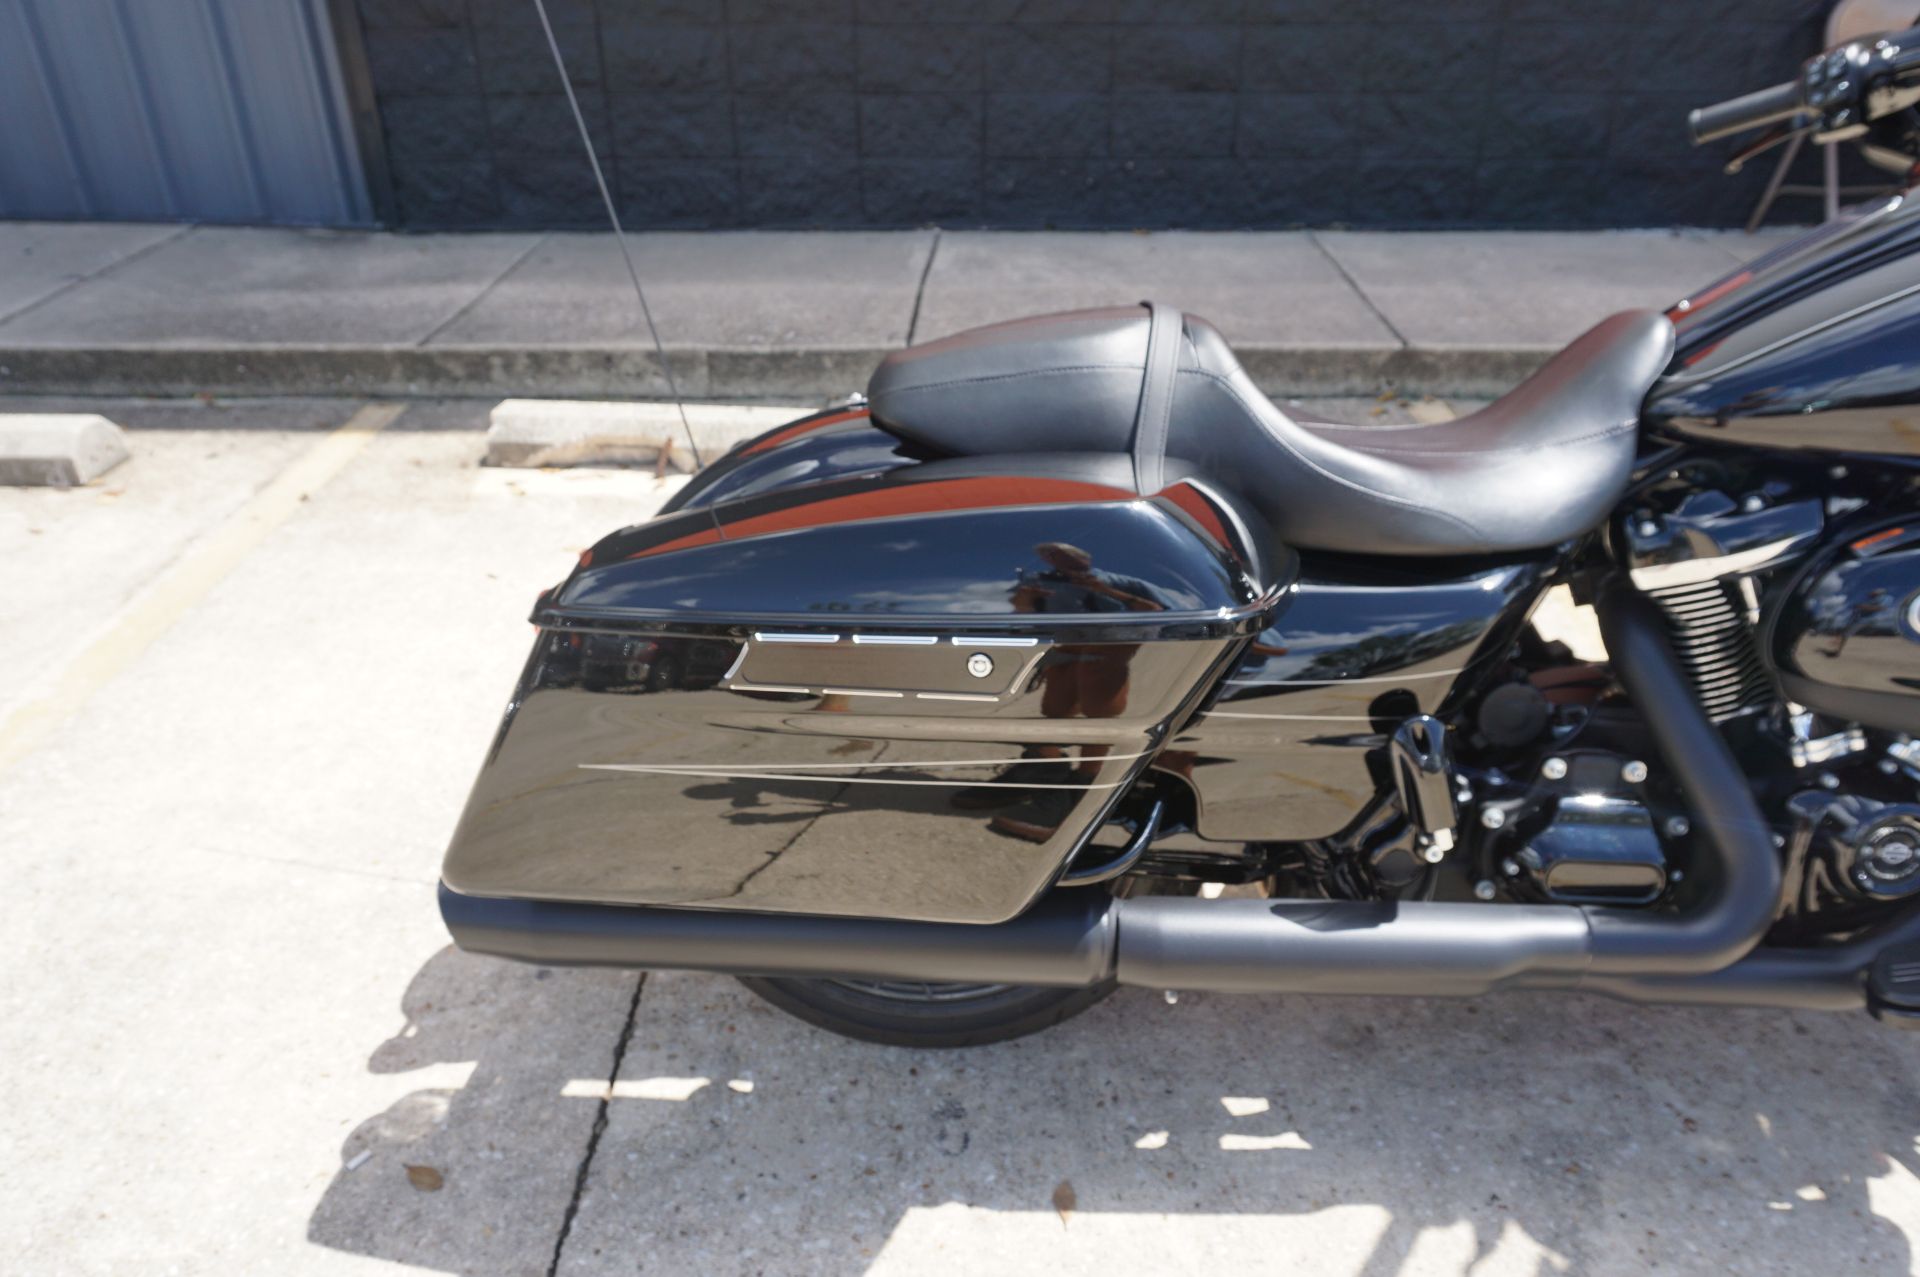 2020 Harley-Davidson Street Glide® Special in Metairie, Louisiana - Photo 6